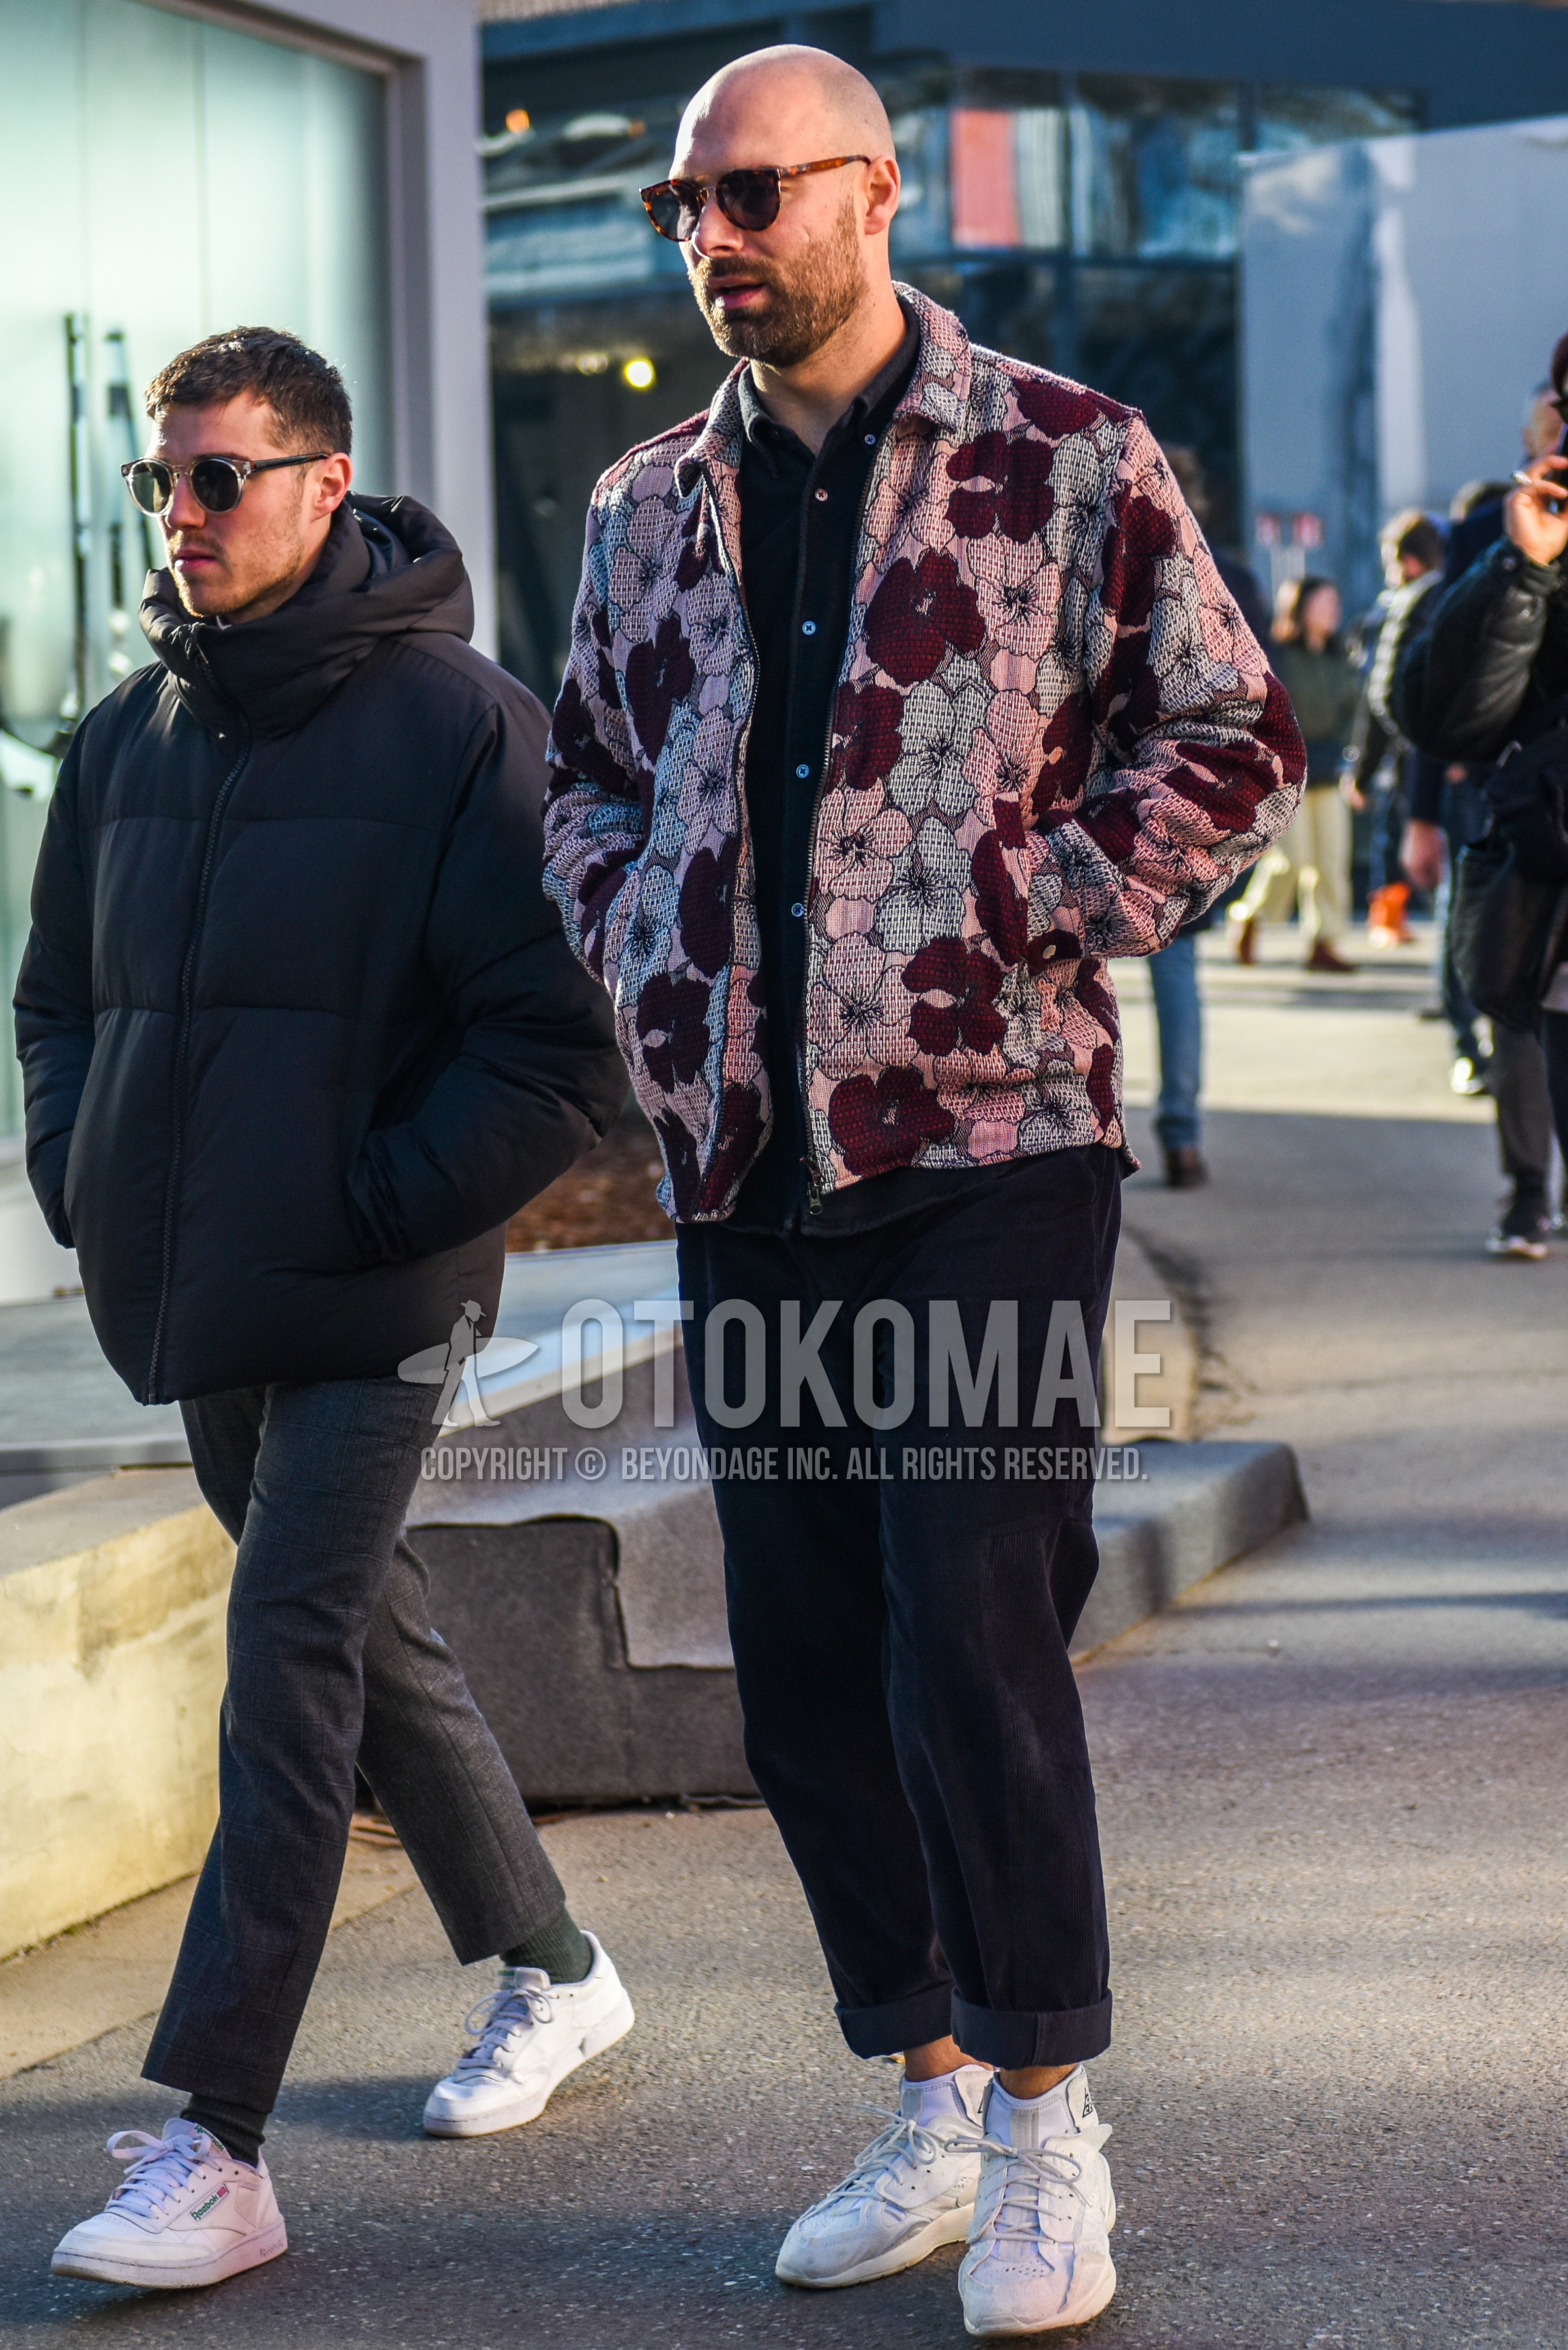 Men's winter outfit with brown tortoiseshell sunglasses, pink red botanical shirt jacket, black plain shirt, black plain winter pants (corduroy,velour), white high-cut sneakers.